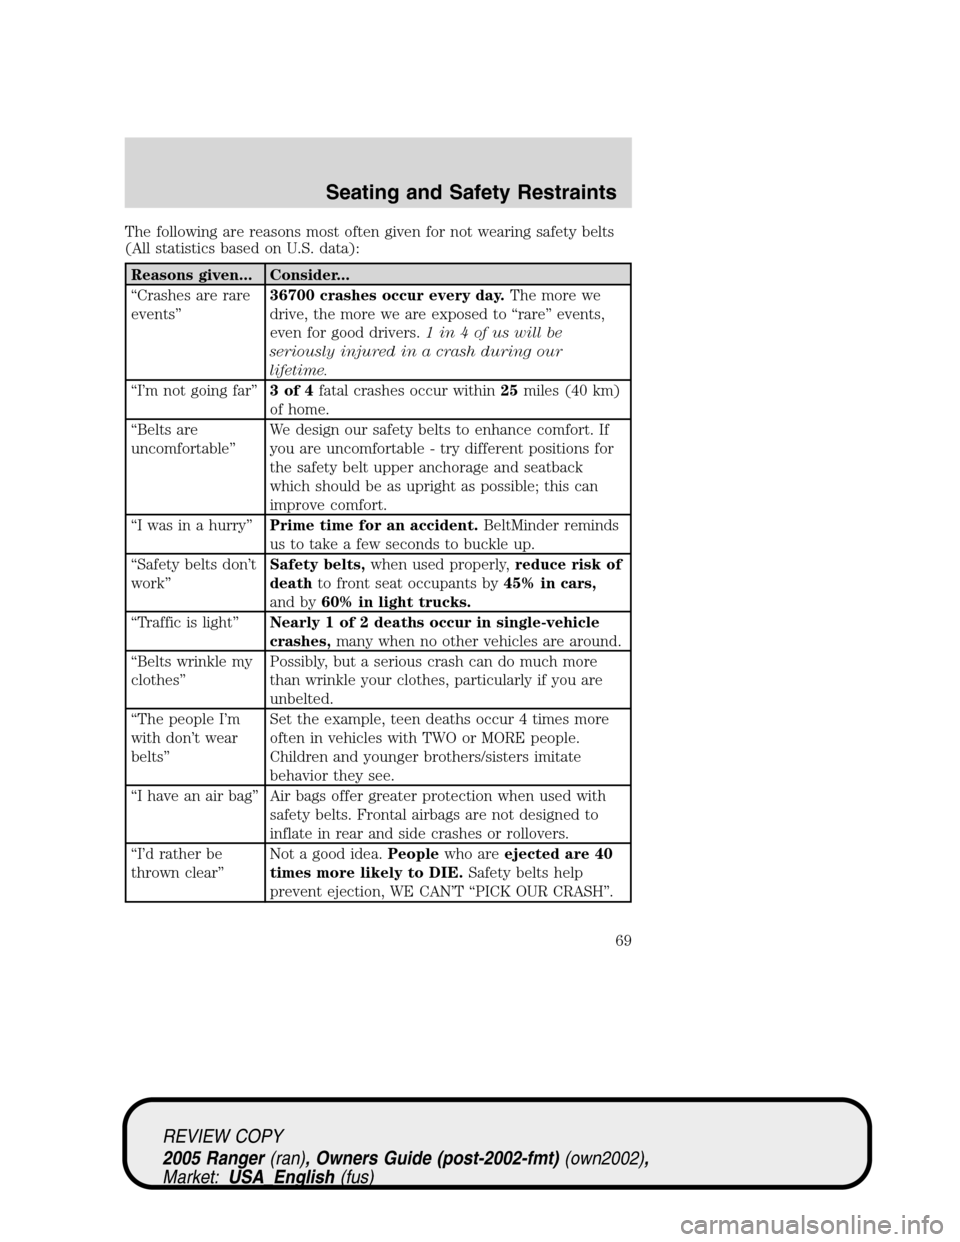 FORD RANGER 2005 2.G Owners Manual The following are reasons most often given for not wearing safety belts
(All statistics based on U.S. data):
Reasons given... Consider...
“Crashes are rare
events”36700 crashes occur every day.The